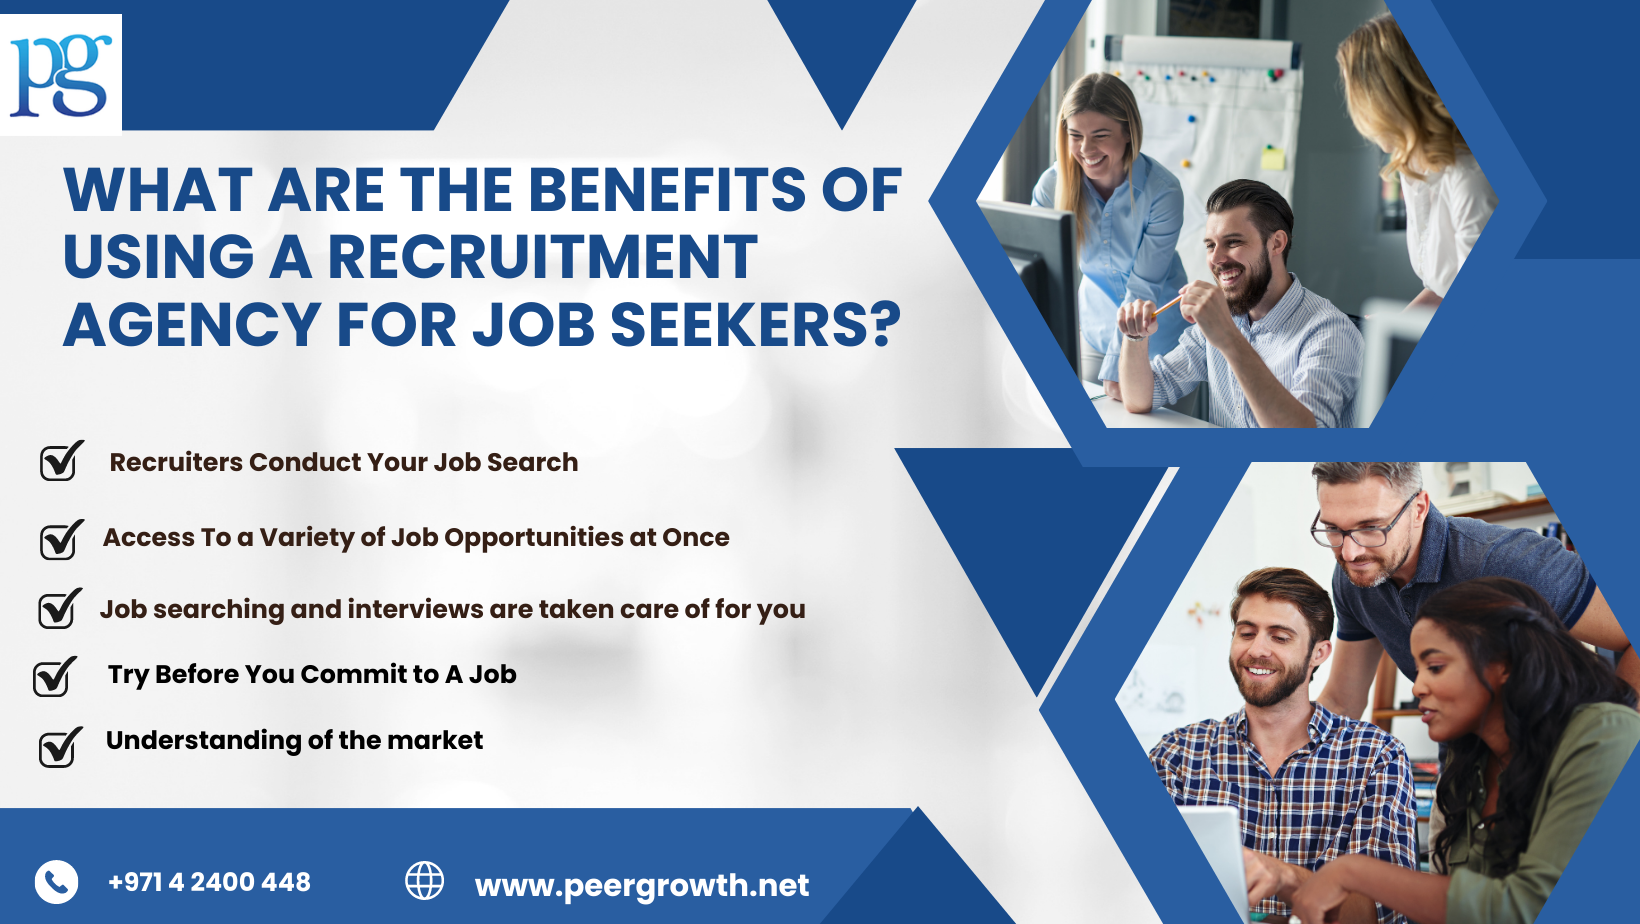 What Are the Benefits of Using a Recruitment Agency for Job Seekers?